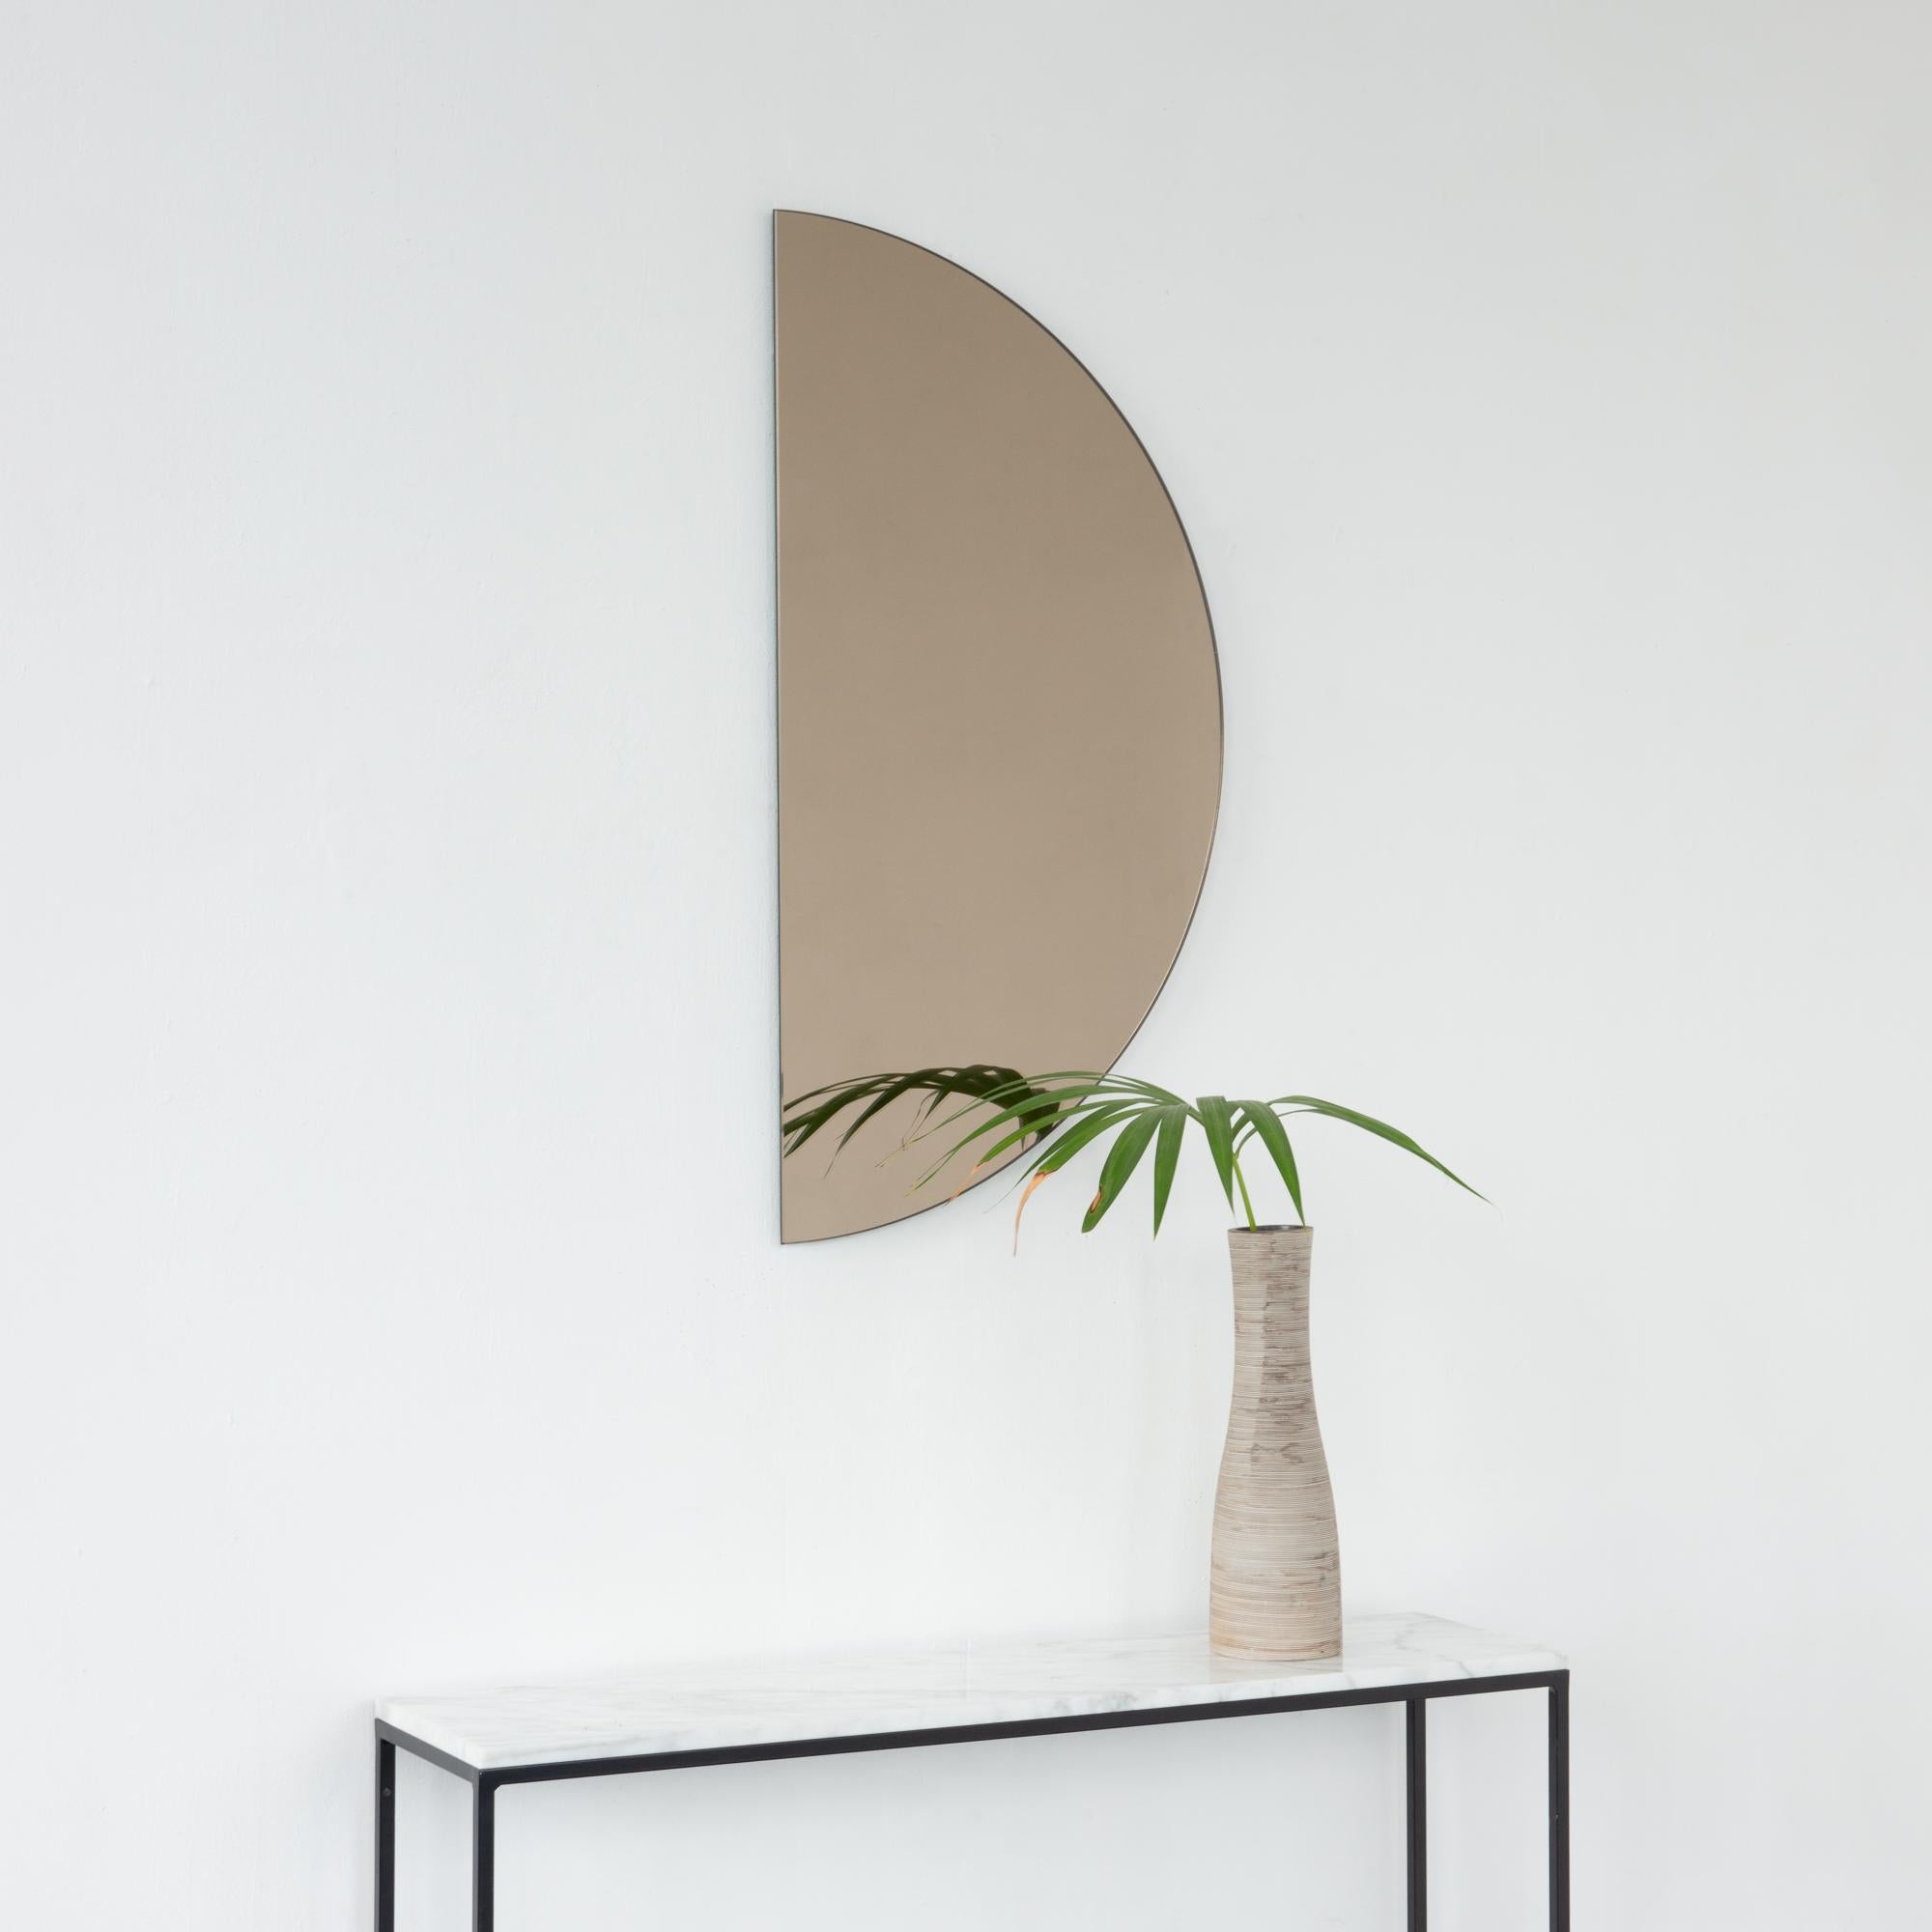 Minimalist half-moon Luna™ bronze tinted frameless mirror with a floating effect. Fitted with a quality and ingenious hanging system for a flexible installation in 4 different directions. Designed and made in London, UK. 

The backing has a brand